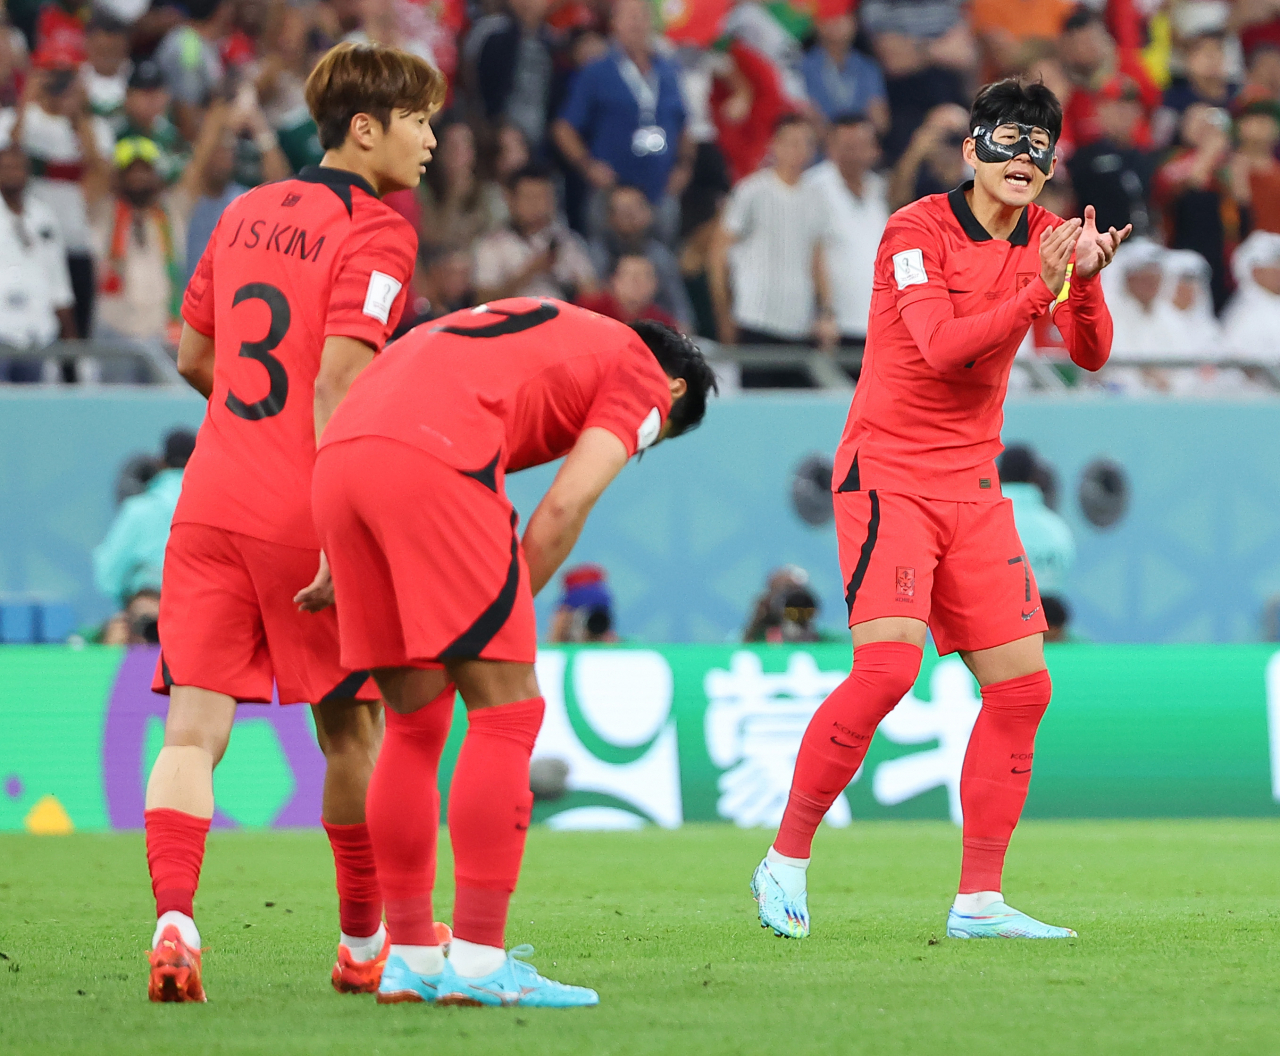 The South Korean team captain Son Heung-min (right) encourages his teammates during the Group H finale of the FIFA World Cup Qatar 2022 at the Education City Stadidum at Al Rayyan, Qatar on Saturday, Korean time. (Yonhap)